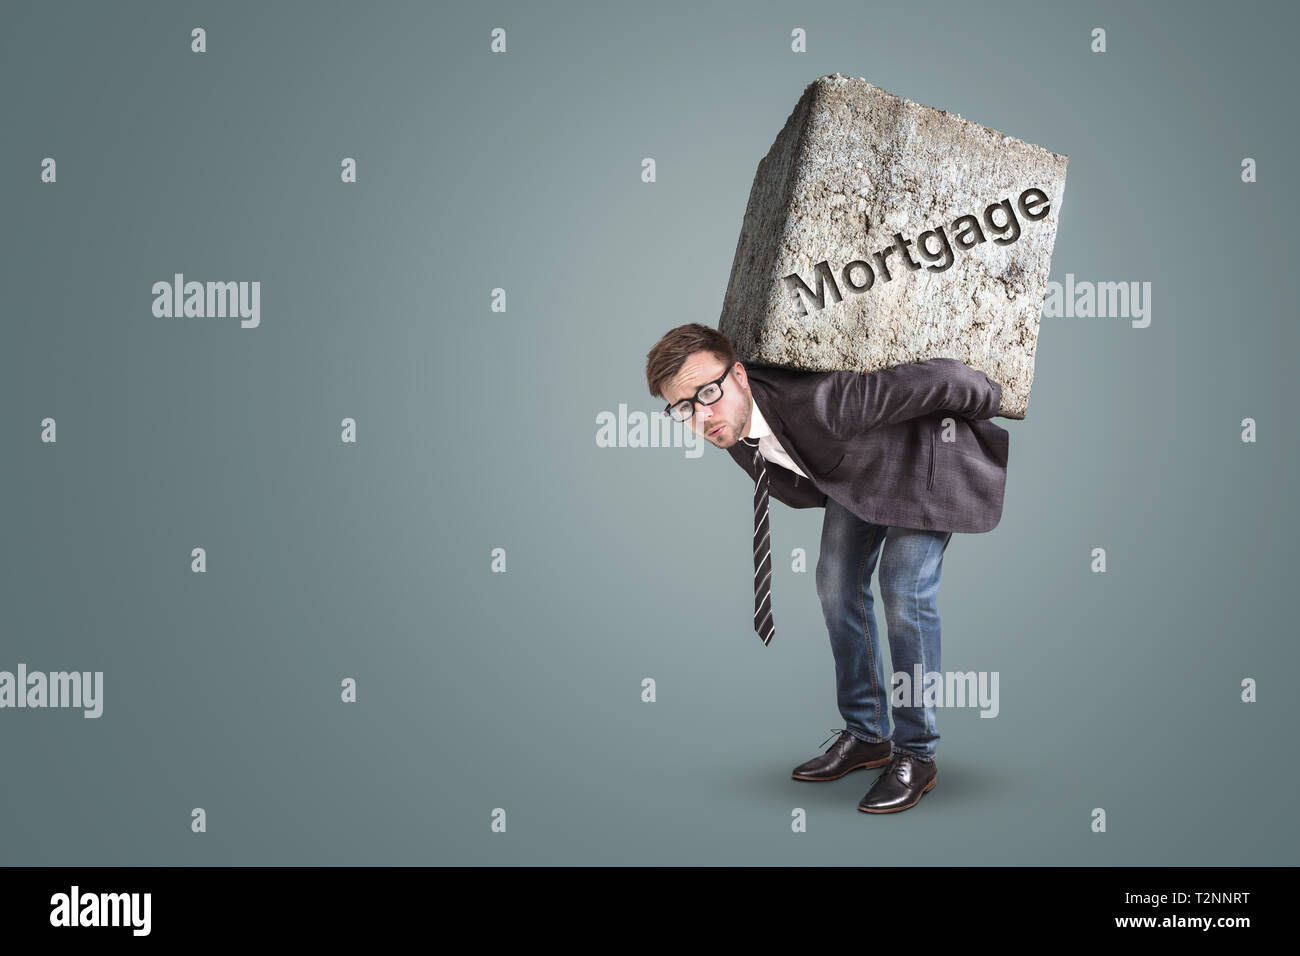 Concept of a man carrying a large stone with the word “Mortgage” on it Stock Photo